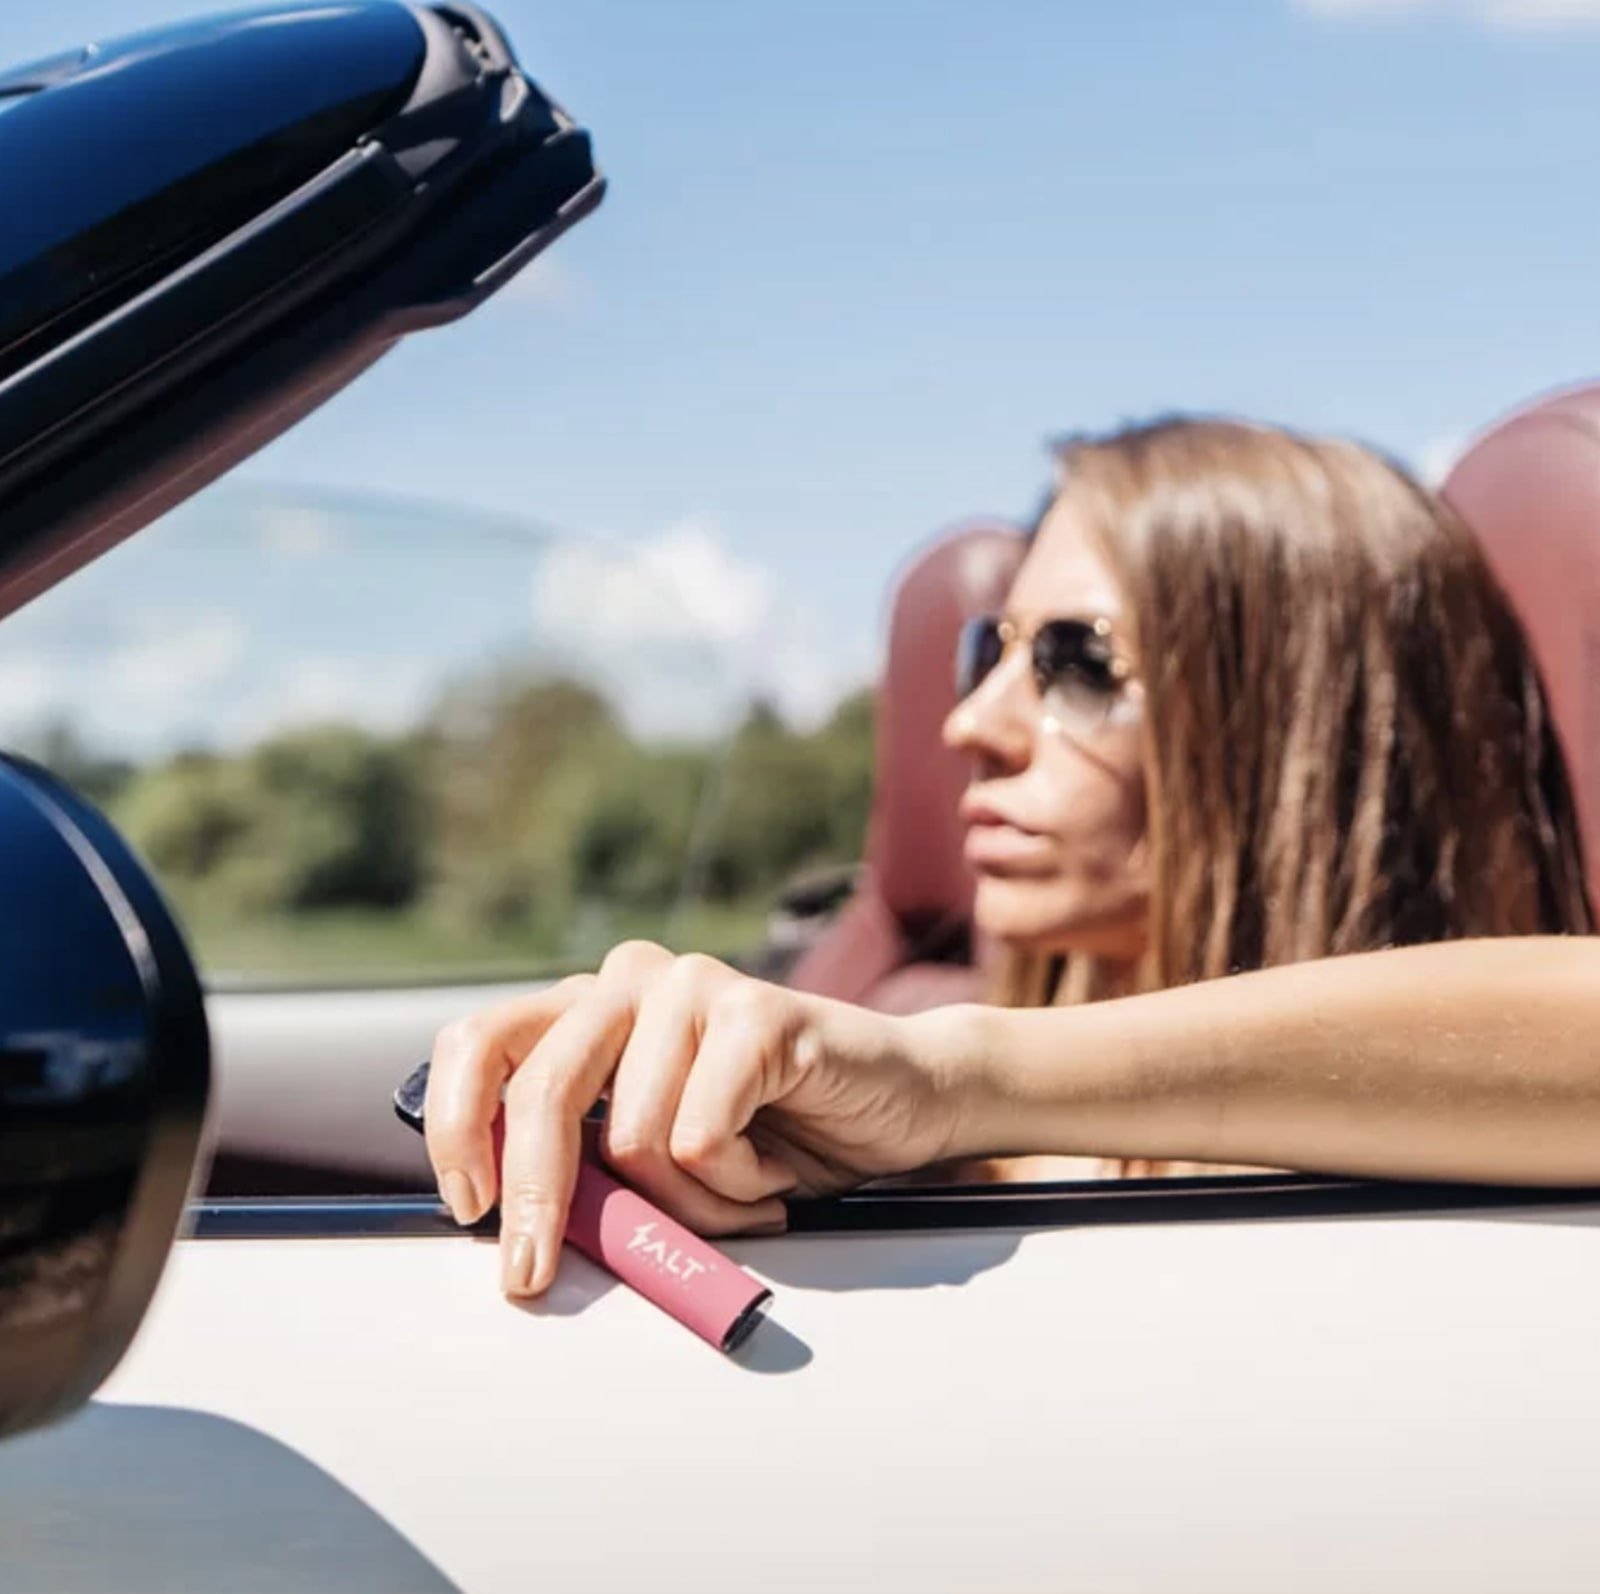 Girl driving a car and holding a vape pod in one hand